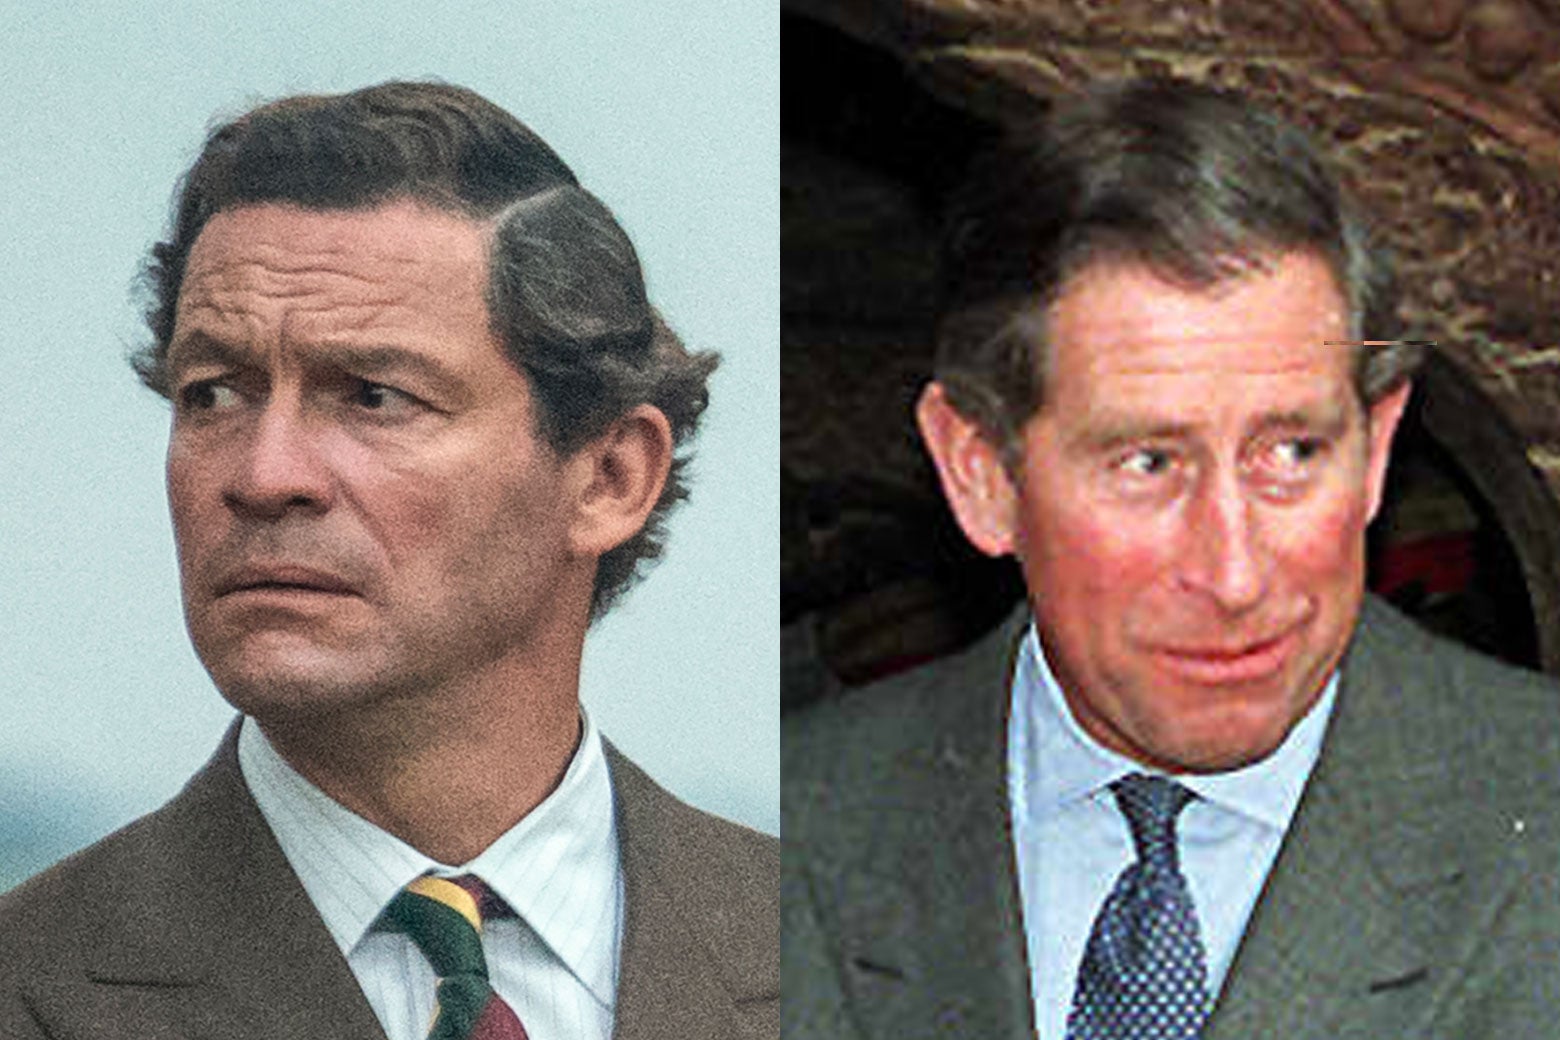 Left: Dominic West as Prince Charles. Right: Prince Charles.